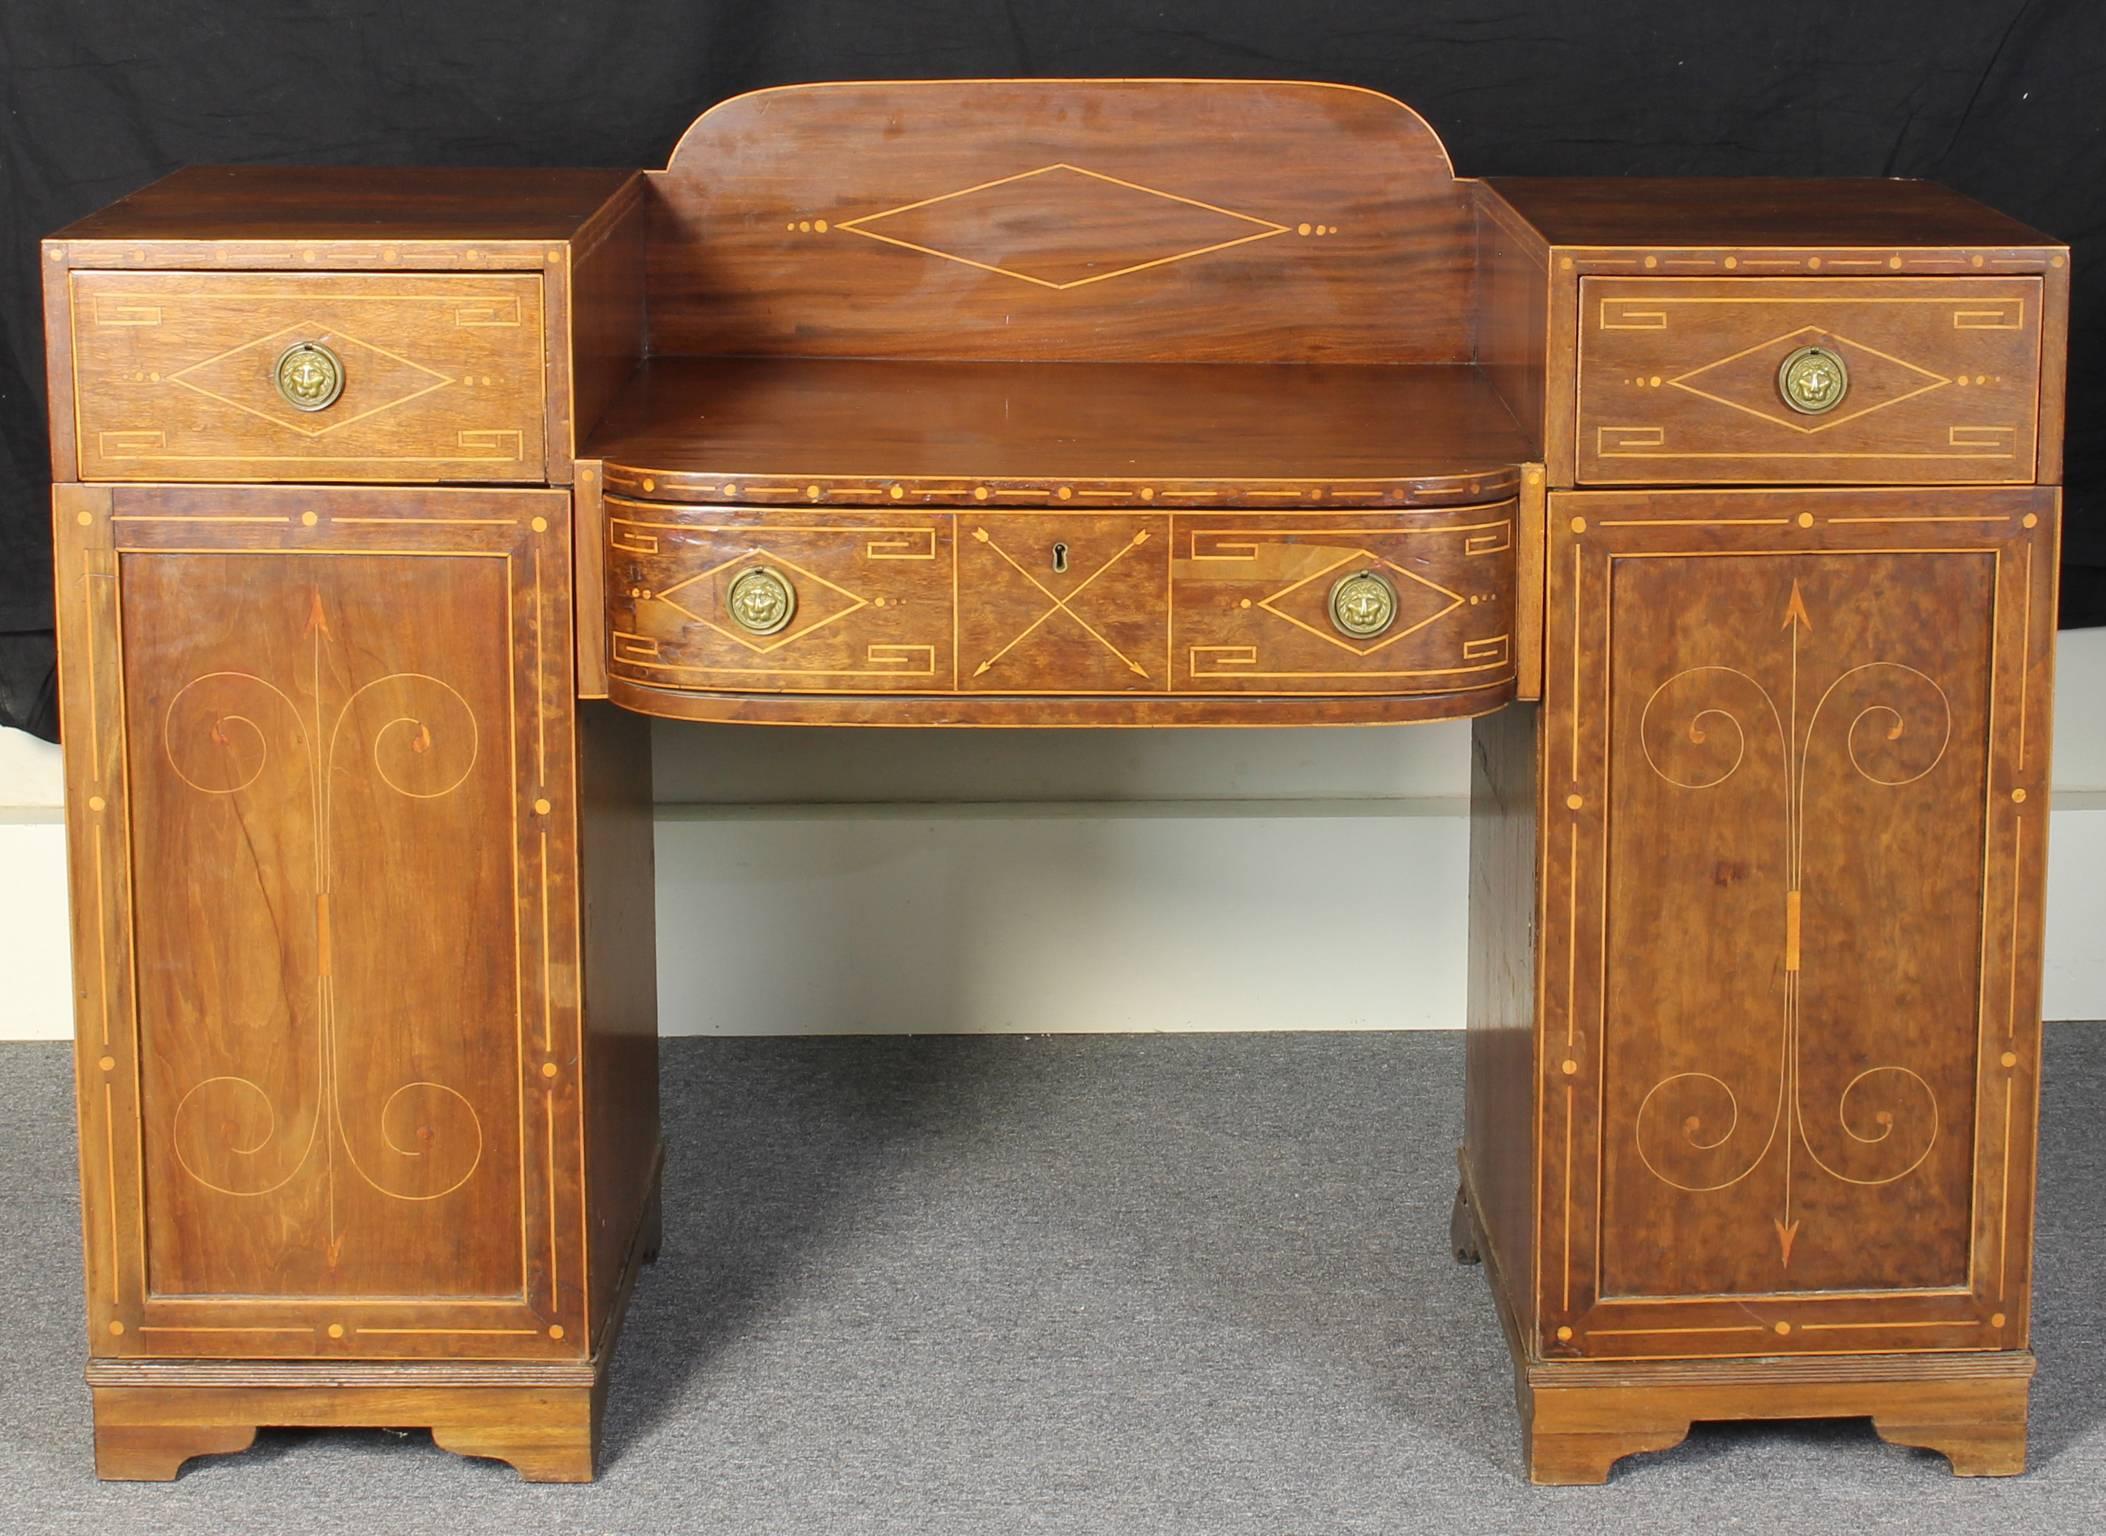 An exceptional Regency mahogany sideboard with extensive satinwood cross banding. The three drawers, each lined with green baize silver cloth over two pedestal doors. This piece displays very fine original lion's head pulls.